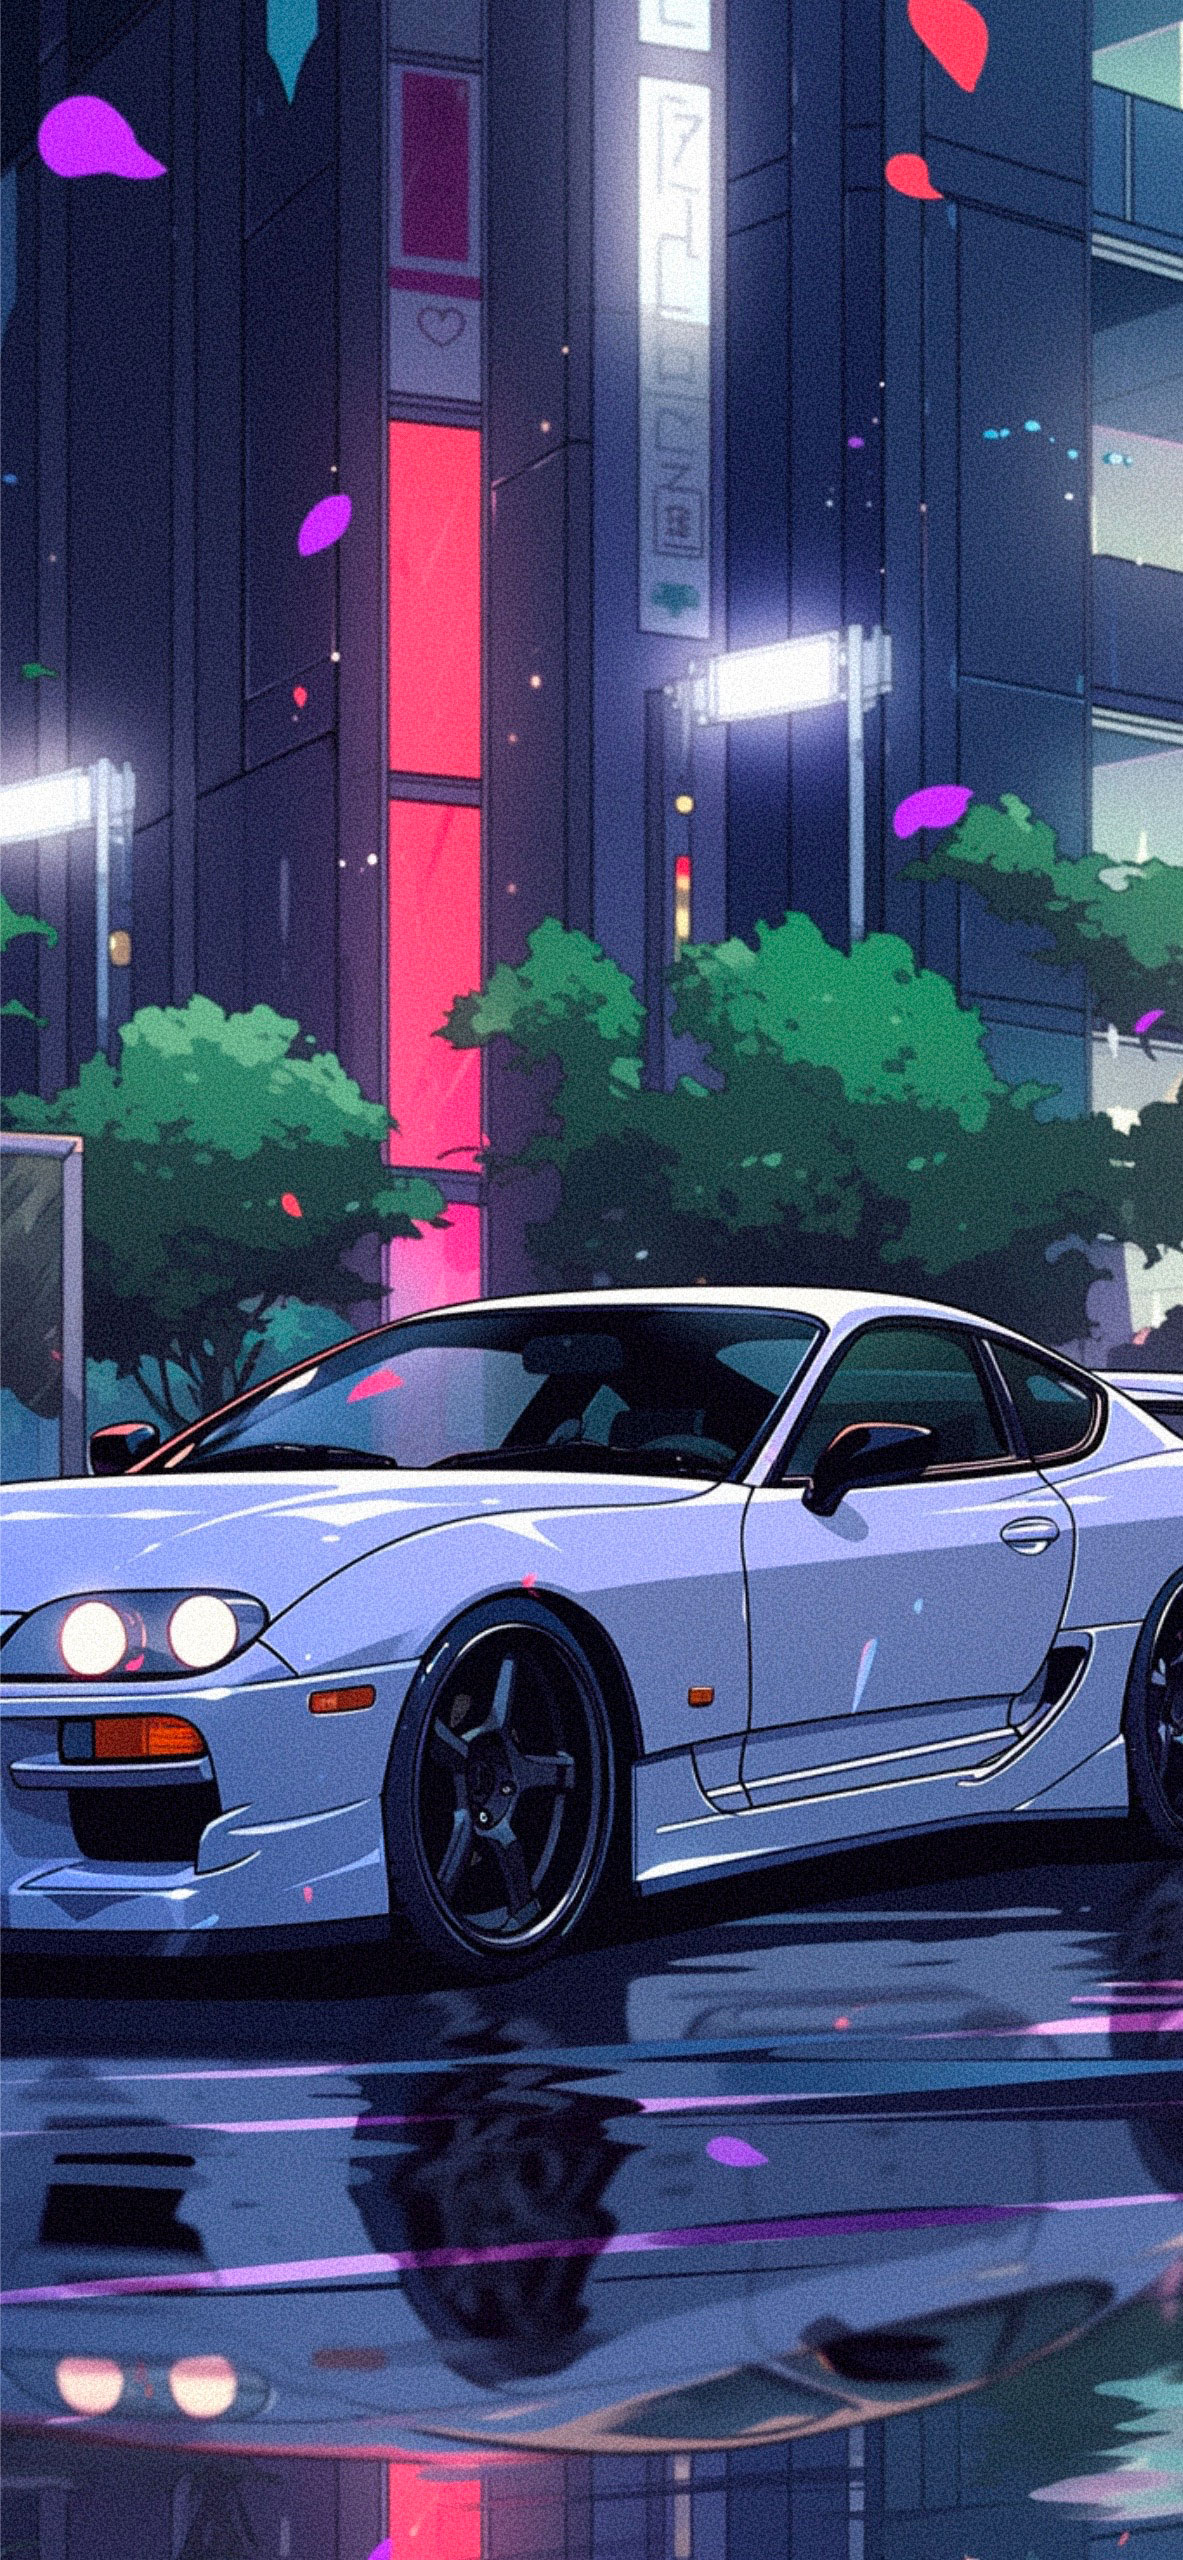 Aggregate more than 79 car anime wallpaper latest awesomeenglish.edu.vn